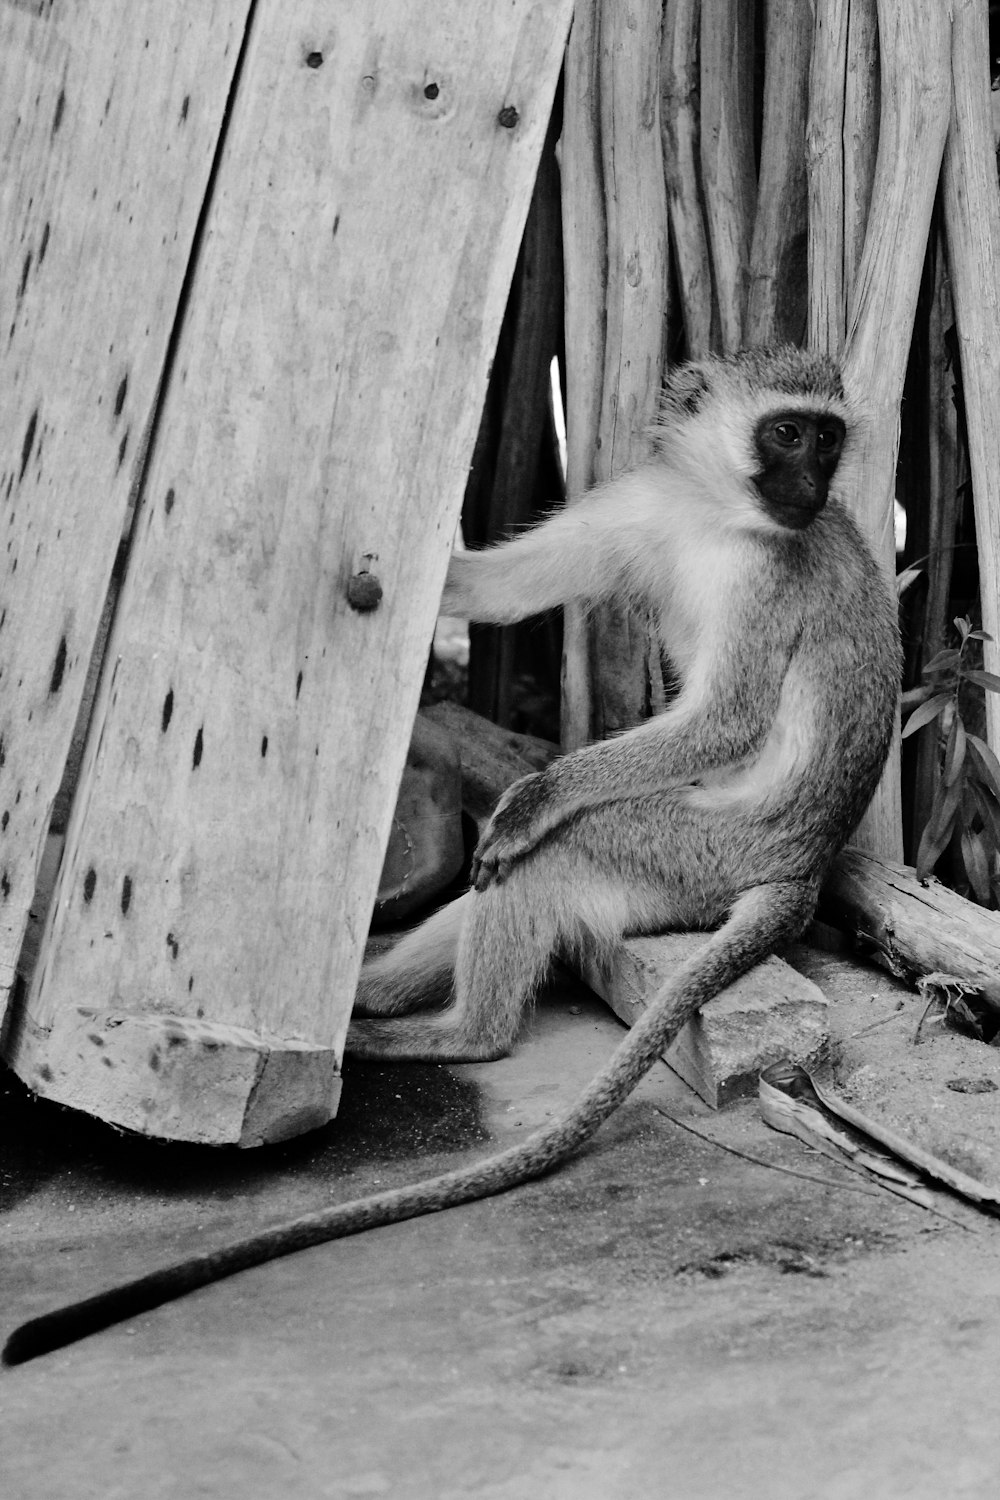 a monkey sitting on the ground next to a wooden structure